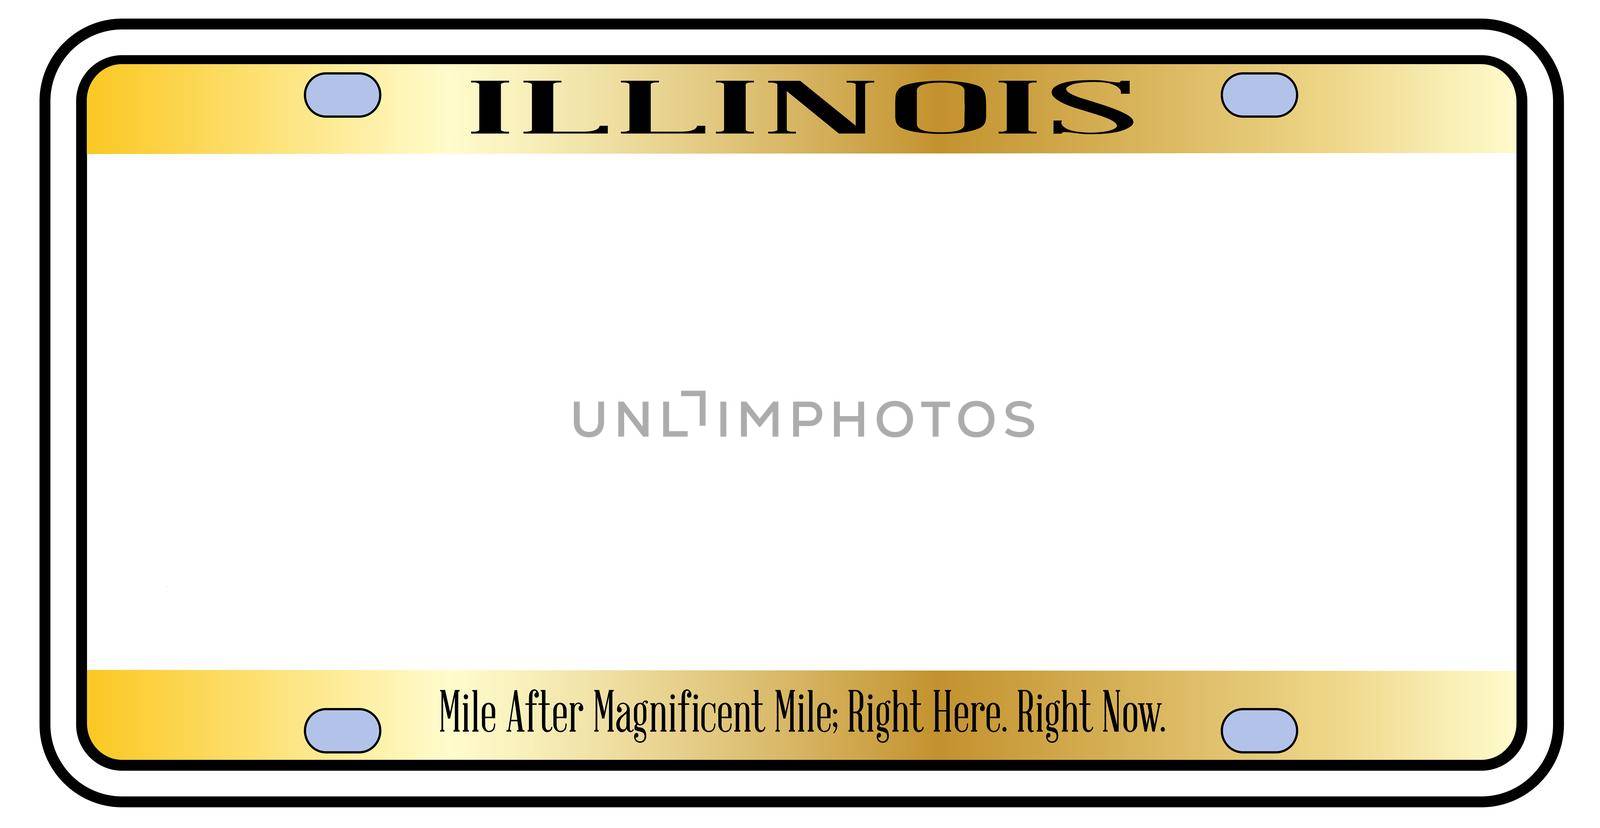 Blank Illinois state license plate in the colors of the state flag over a white background